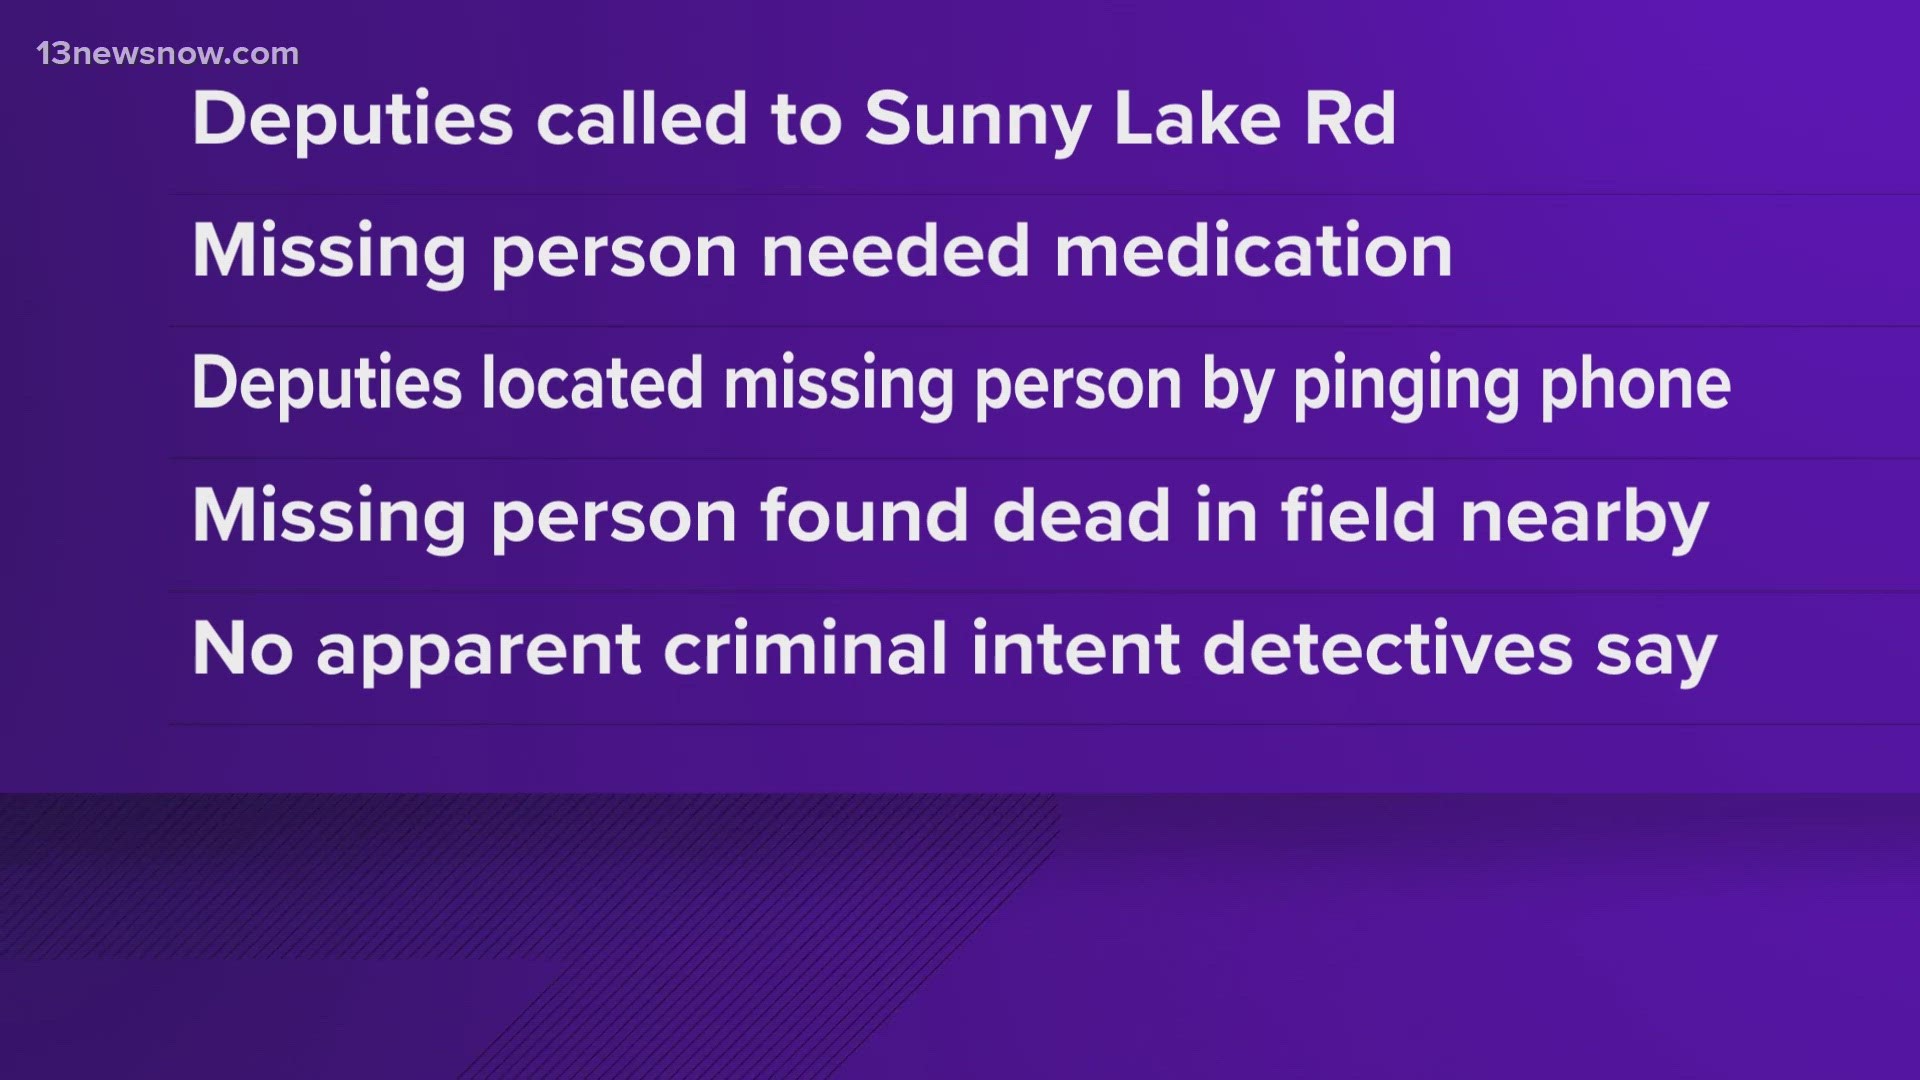 A missing person was found dead in Currituck County early Saturday.